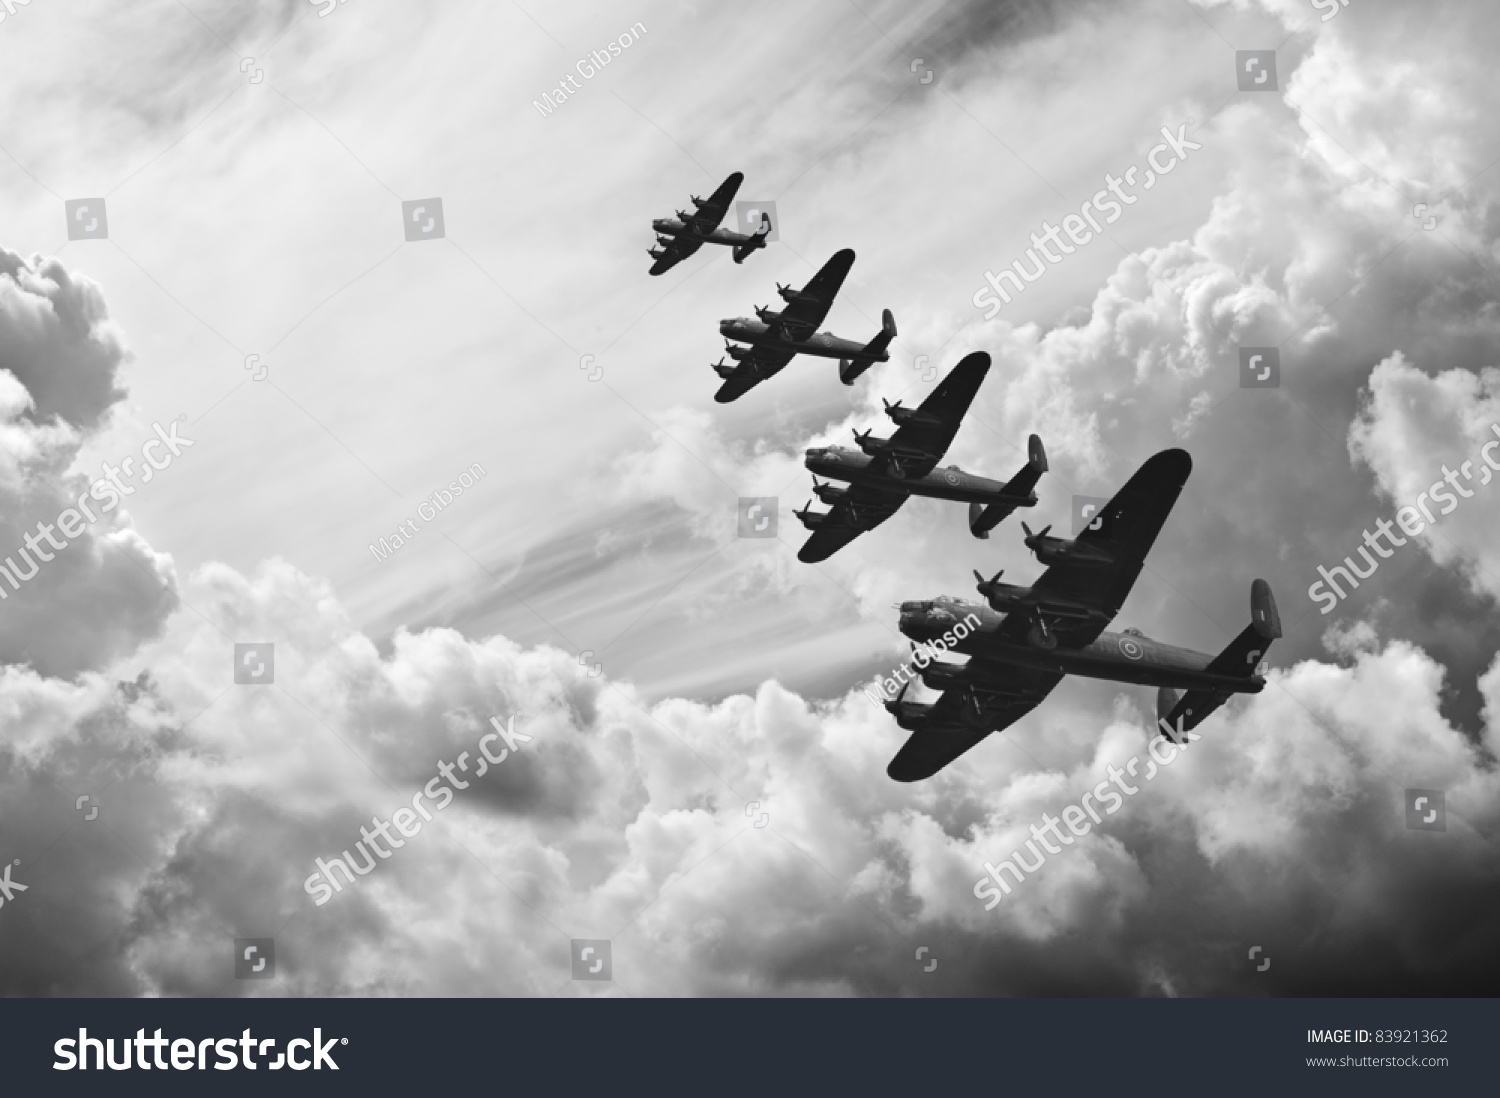 Black and white retro image of Lancaster bombers from Battle of Britain in World War Two #83921362